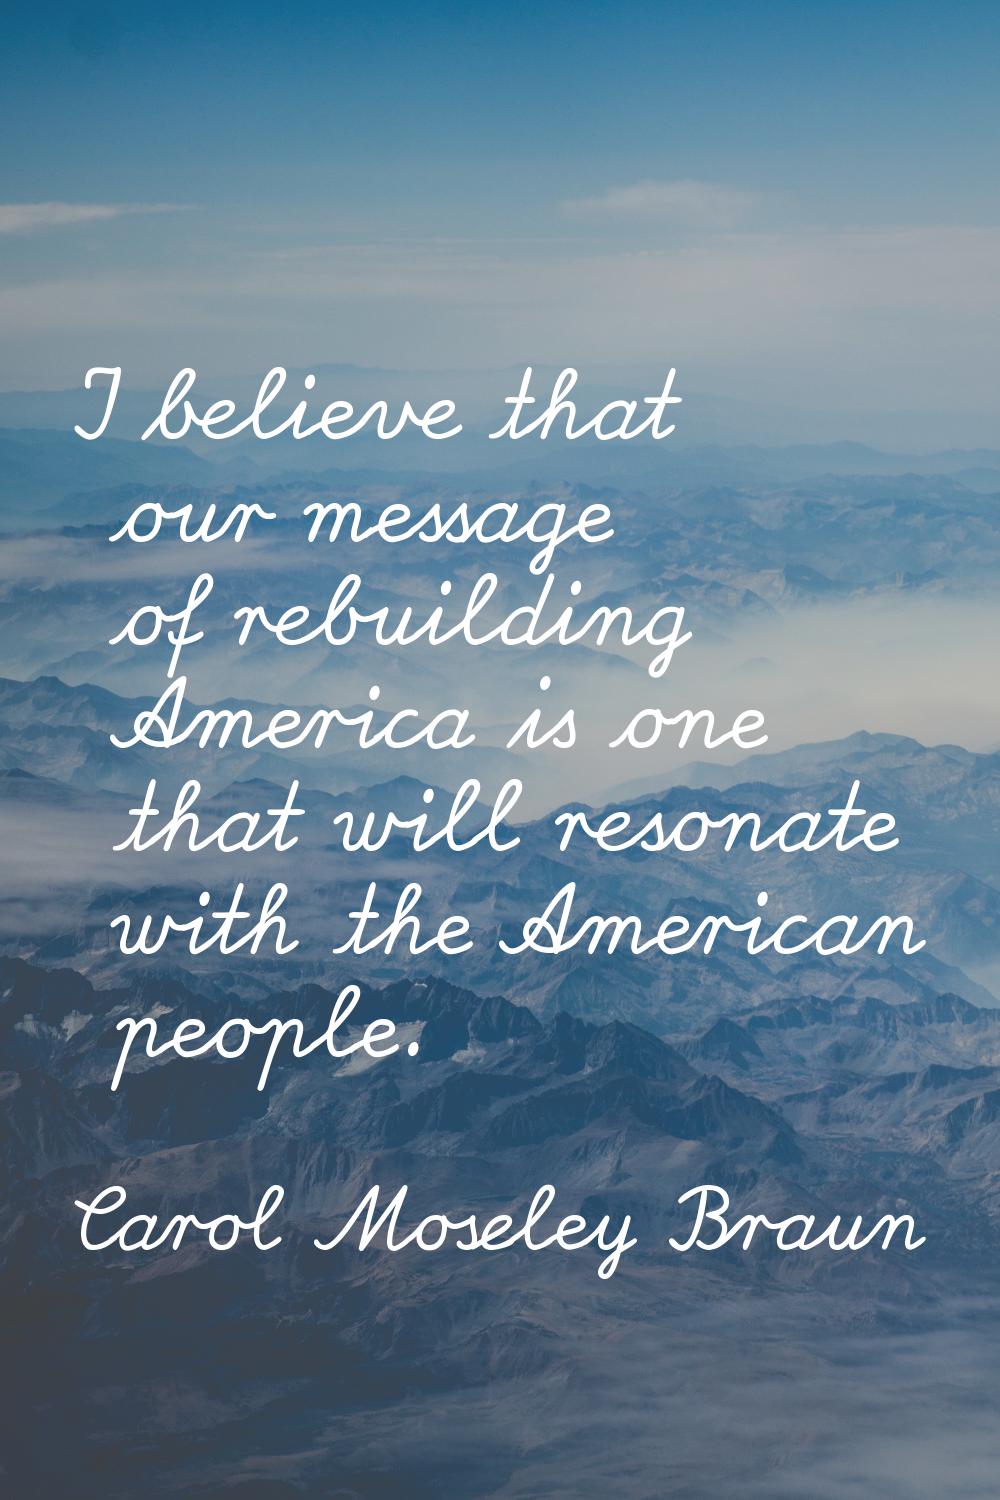 I believe that our message of rebuilding America is one that will resonate with the American people